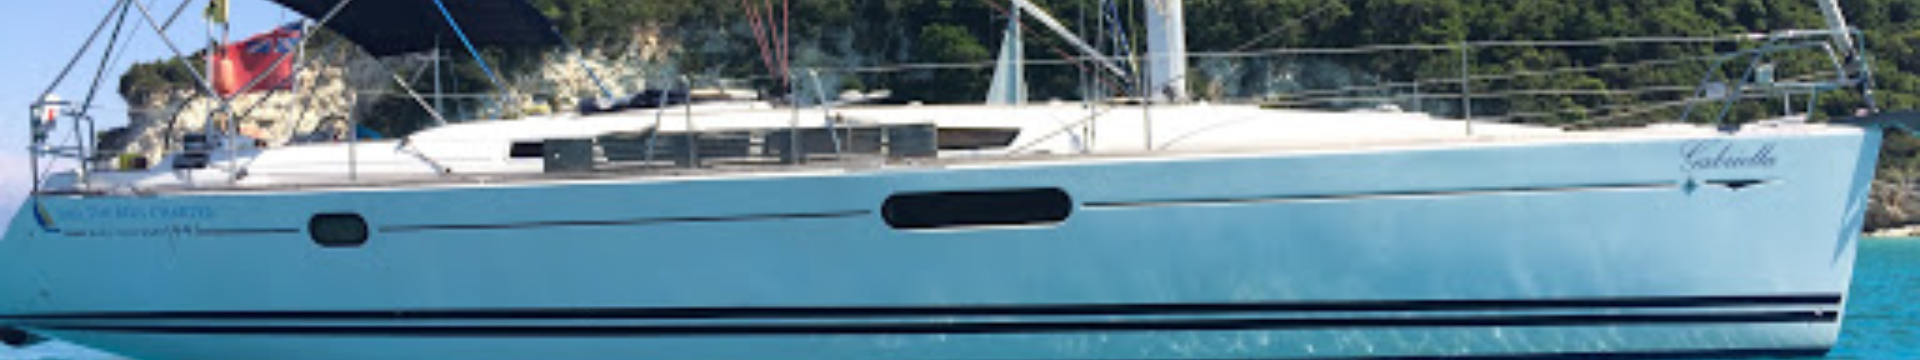 Sun Odyssey 44i Beethoven ( with Bowthruster ,Solar Panels) Main picture for the desktop